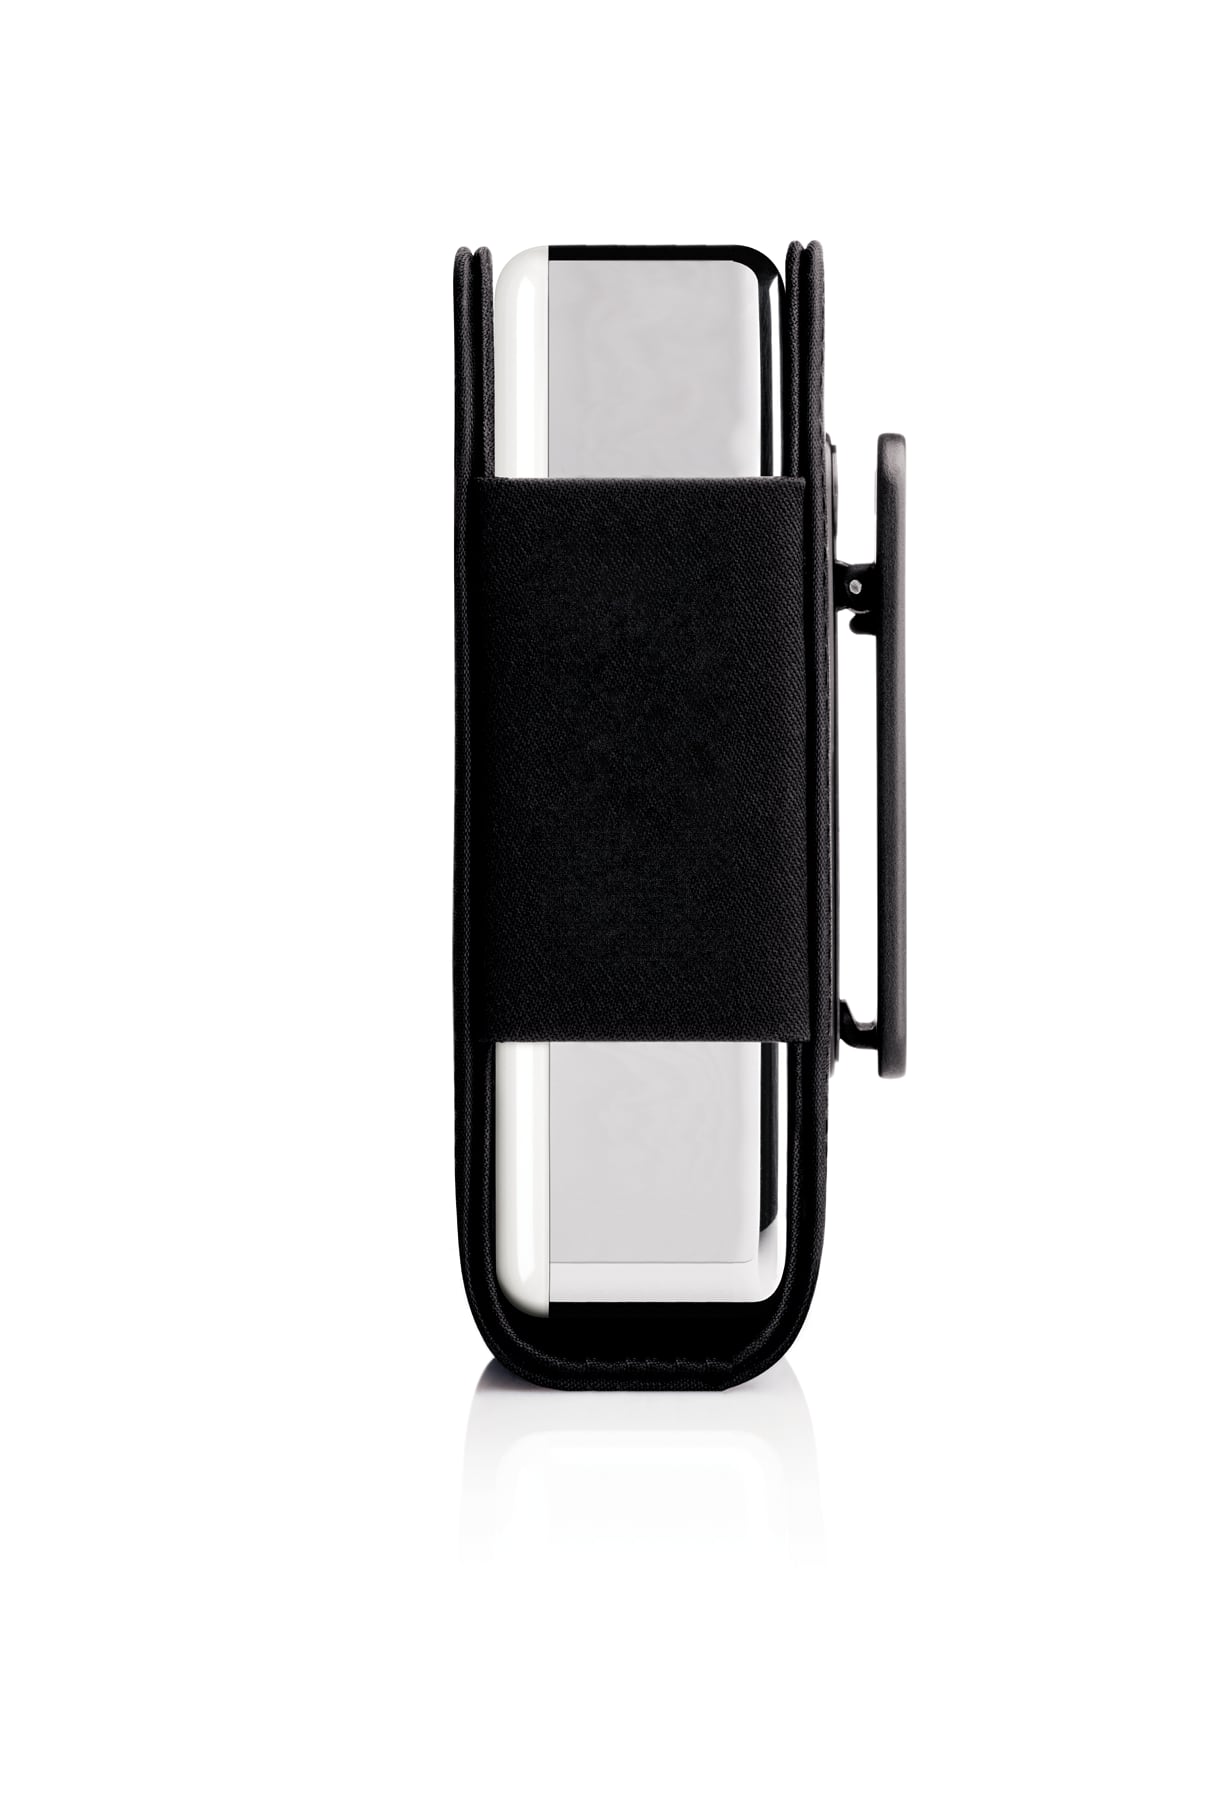 The Casey Neistat iPod “Special Edition” belt clip accessory